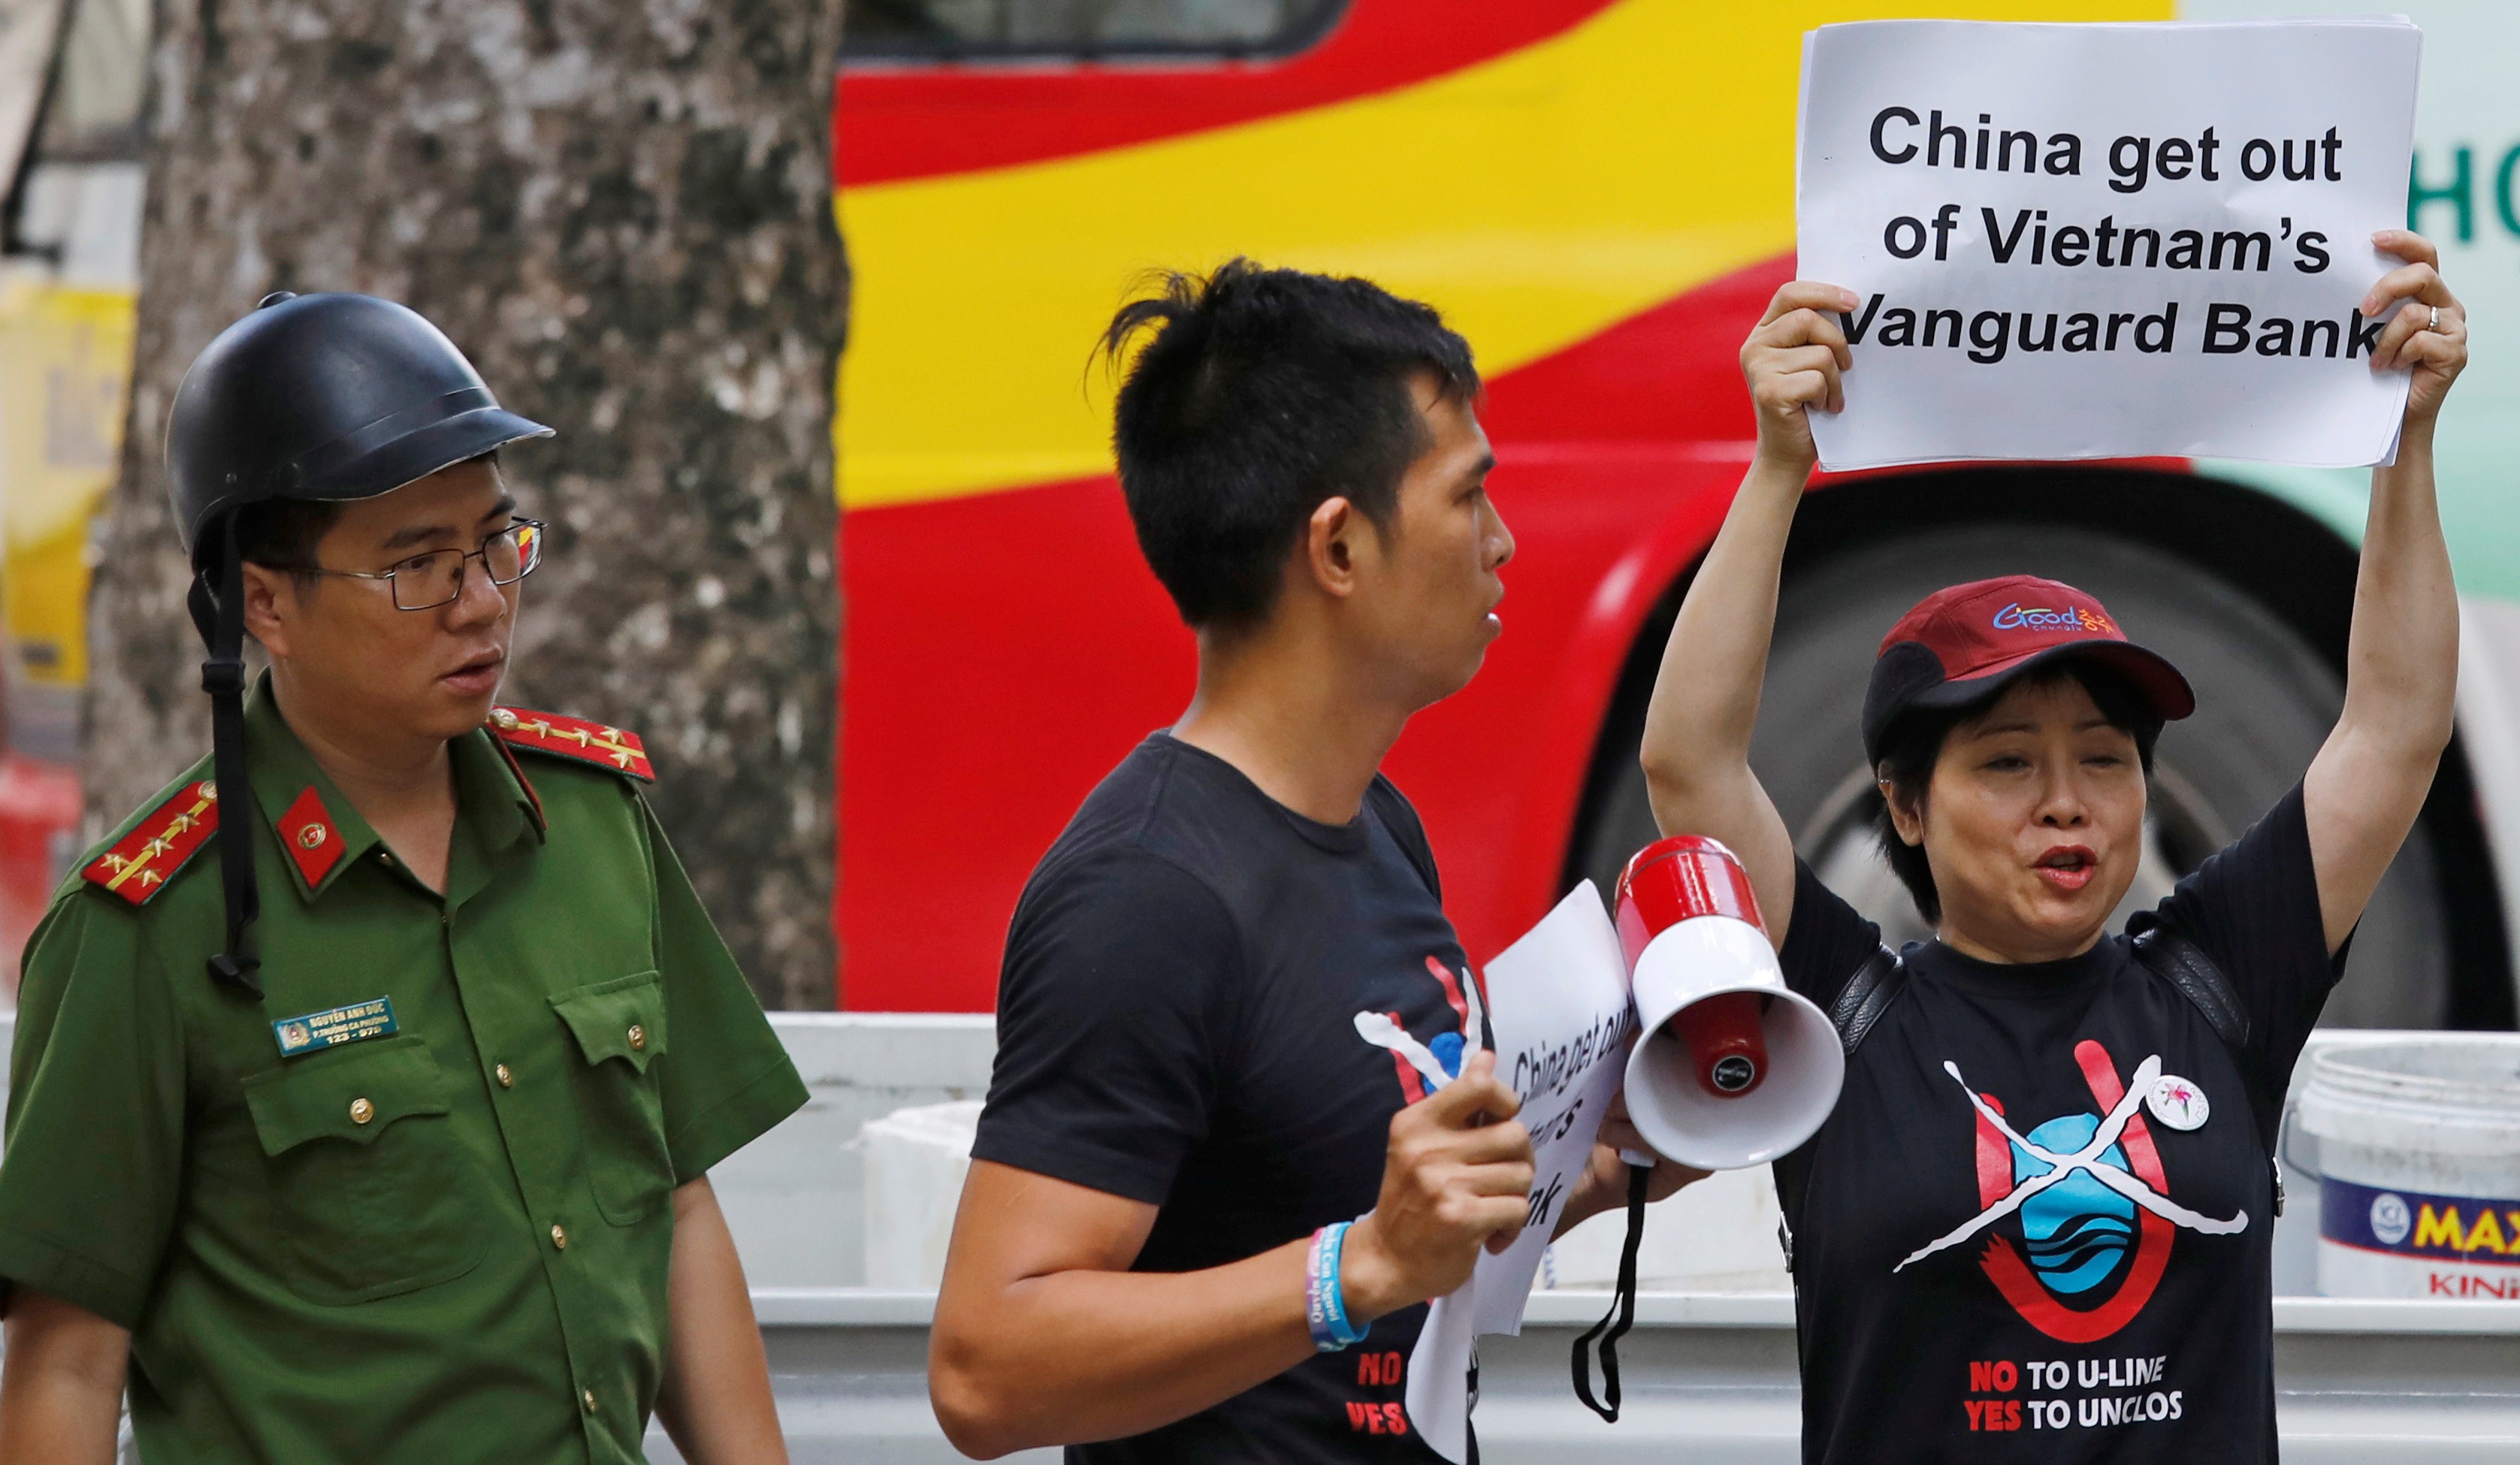 A Vietnamese policeman (left) approaches anti-China protesters in front of the Chinese embassy in Hanoi on August 6. Photo: Reuters